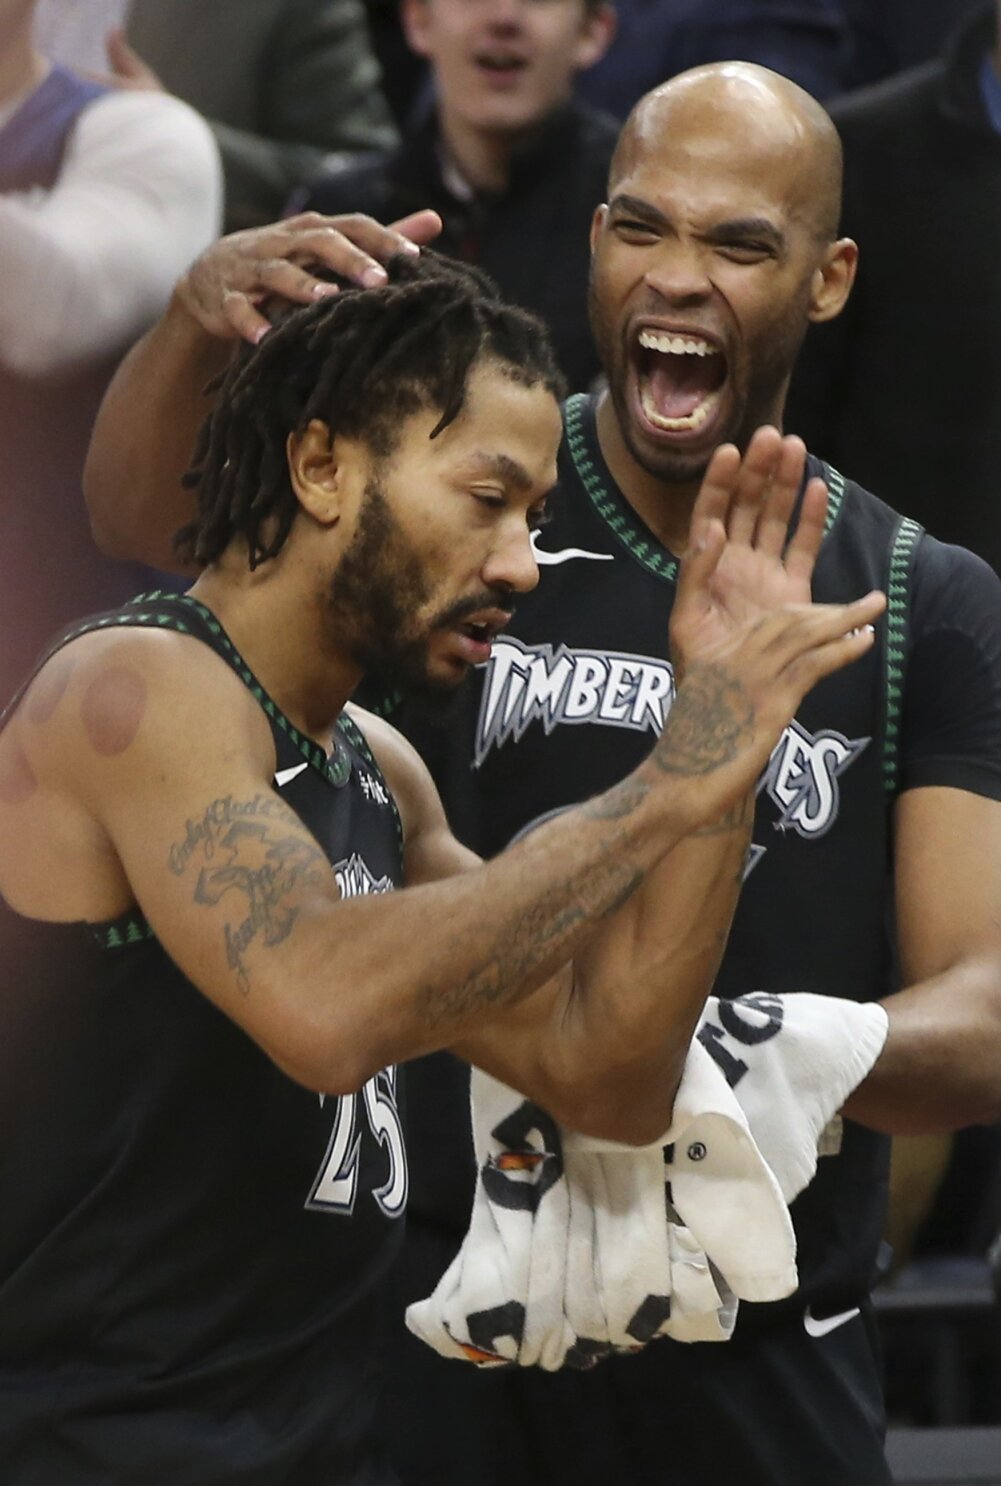 Derrick Rose Cries After 50-Point Game for Timberwolves